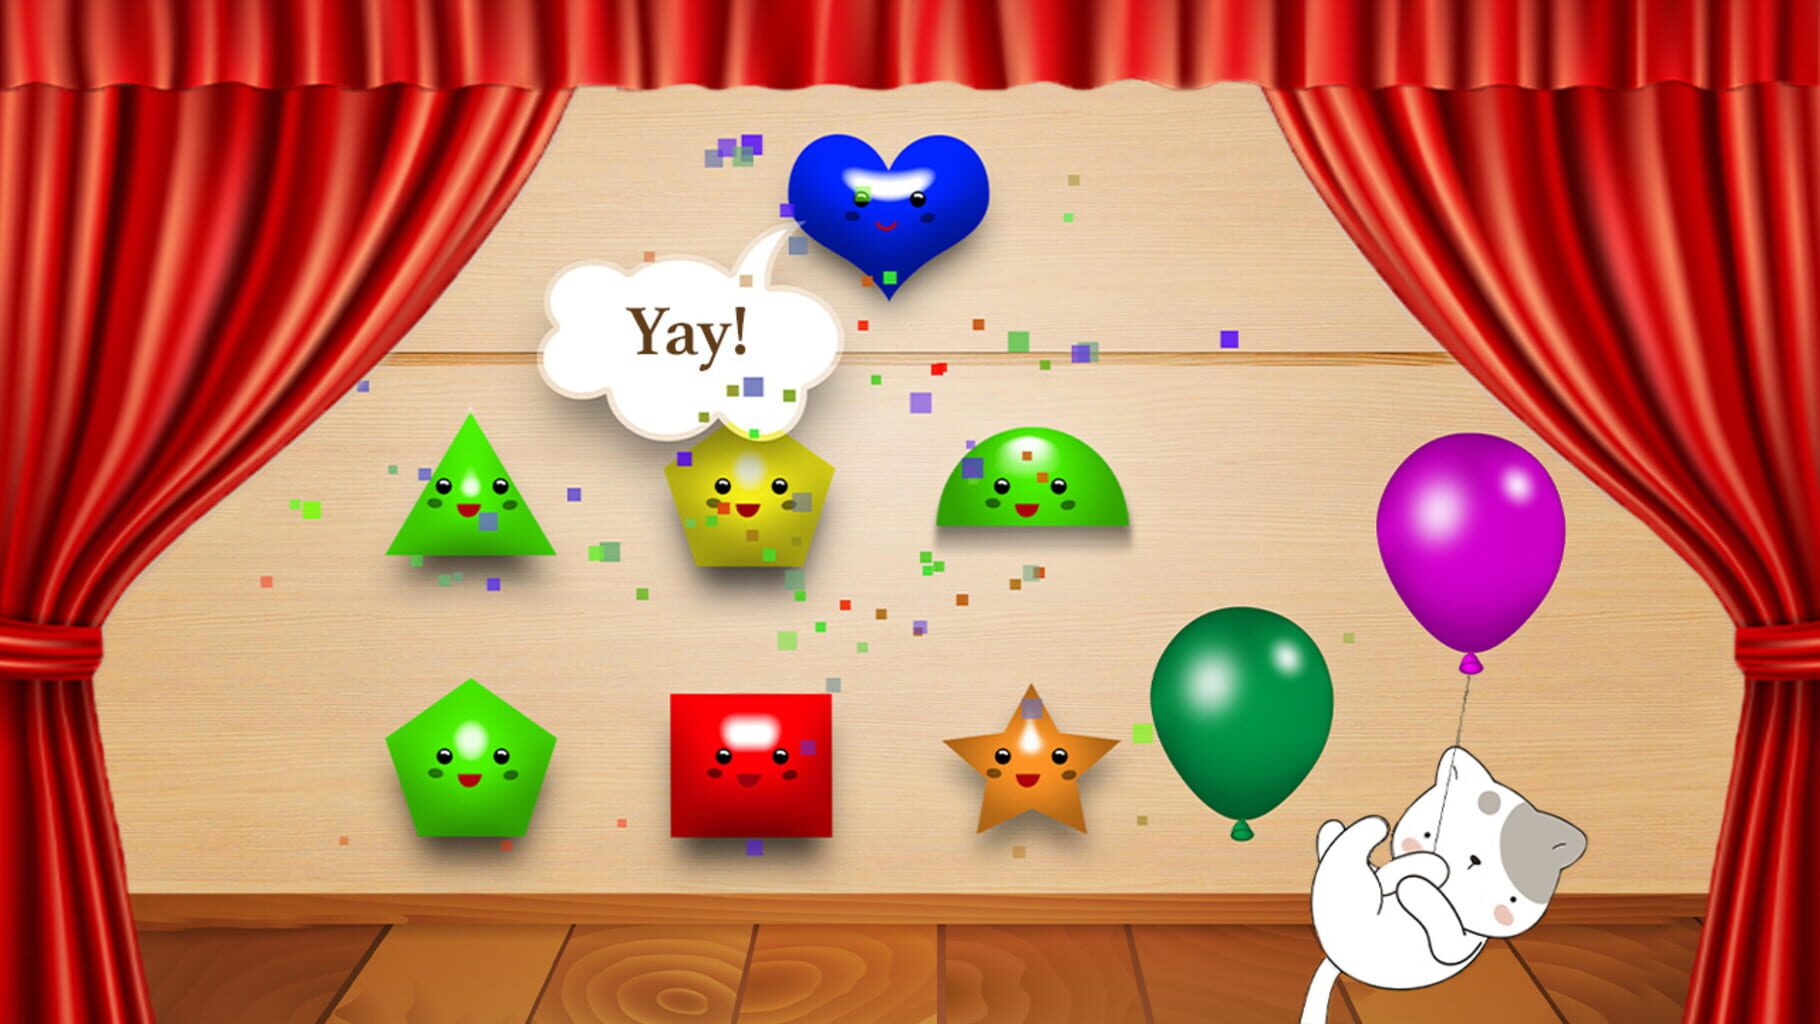 Baby Shapes for Kids screenshot